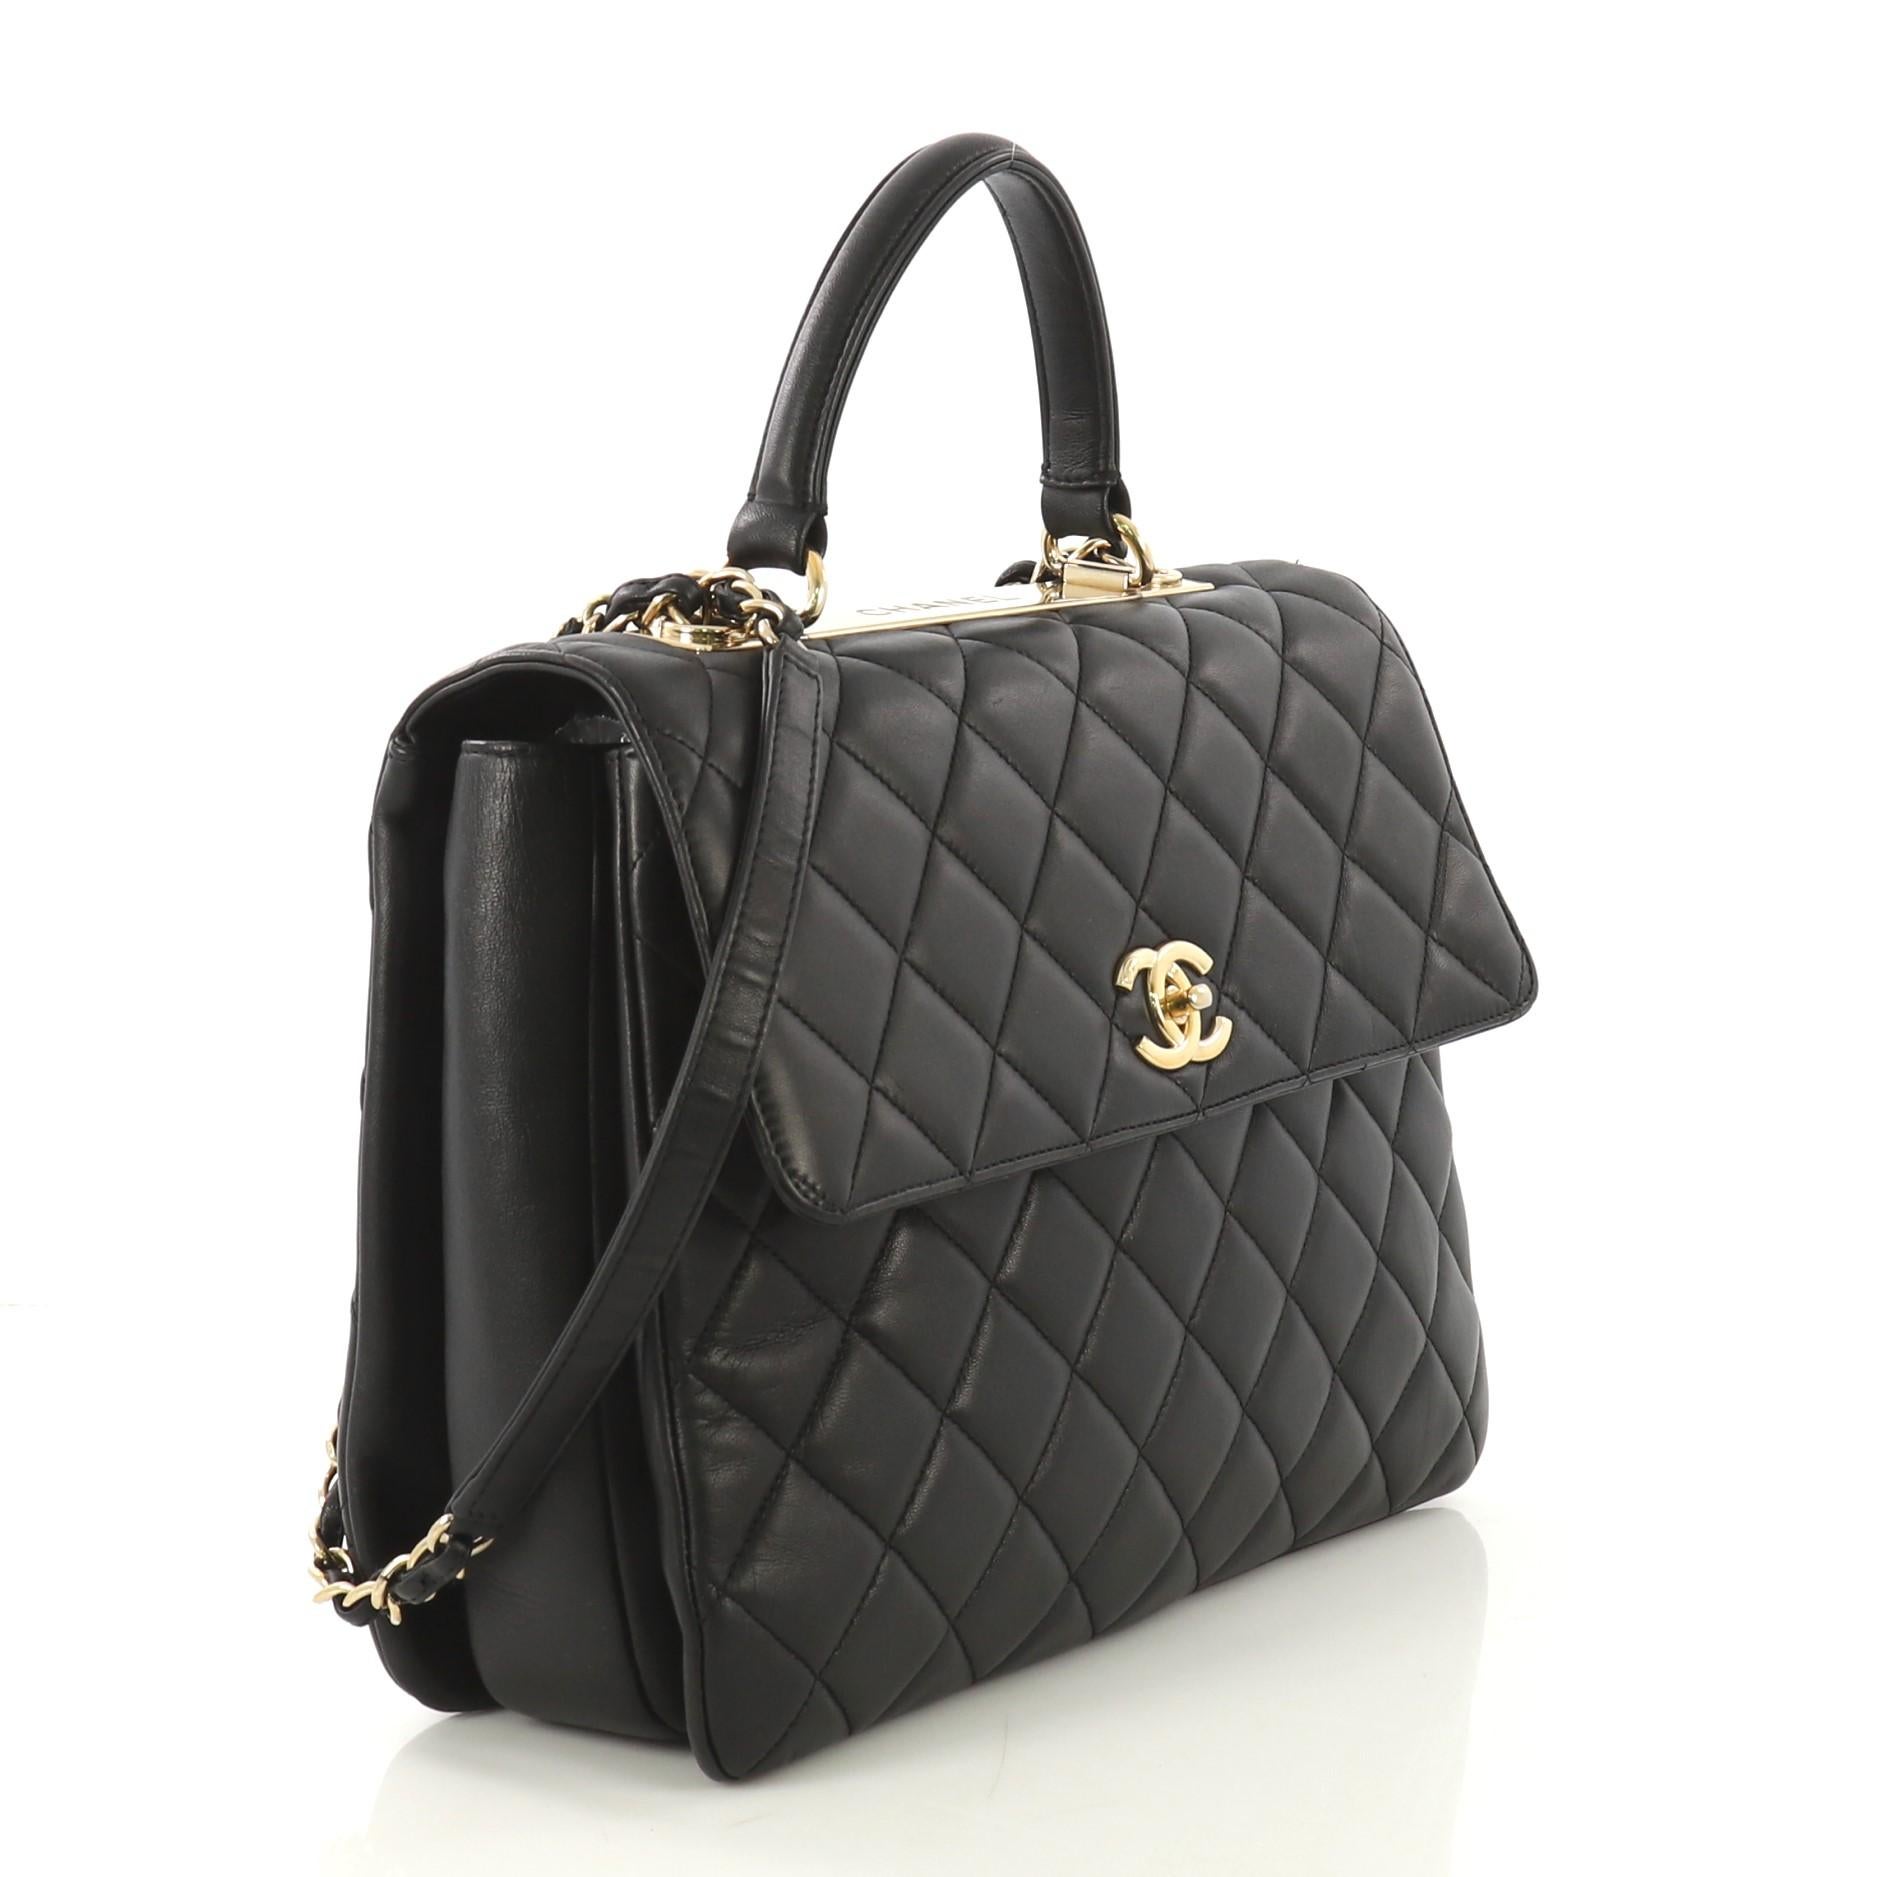 This Chanel Trendy CC Top Handle Bag Quilted Lambskin Large, crafted from black quilted lambskin, features a leather top handle, woven-in leather chain strap with leather pad, and gold-tone hardware. Its turn-lock closure opens to a burgundy leather